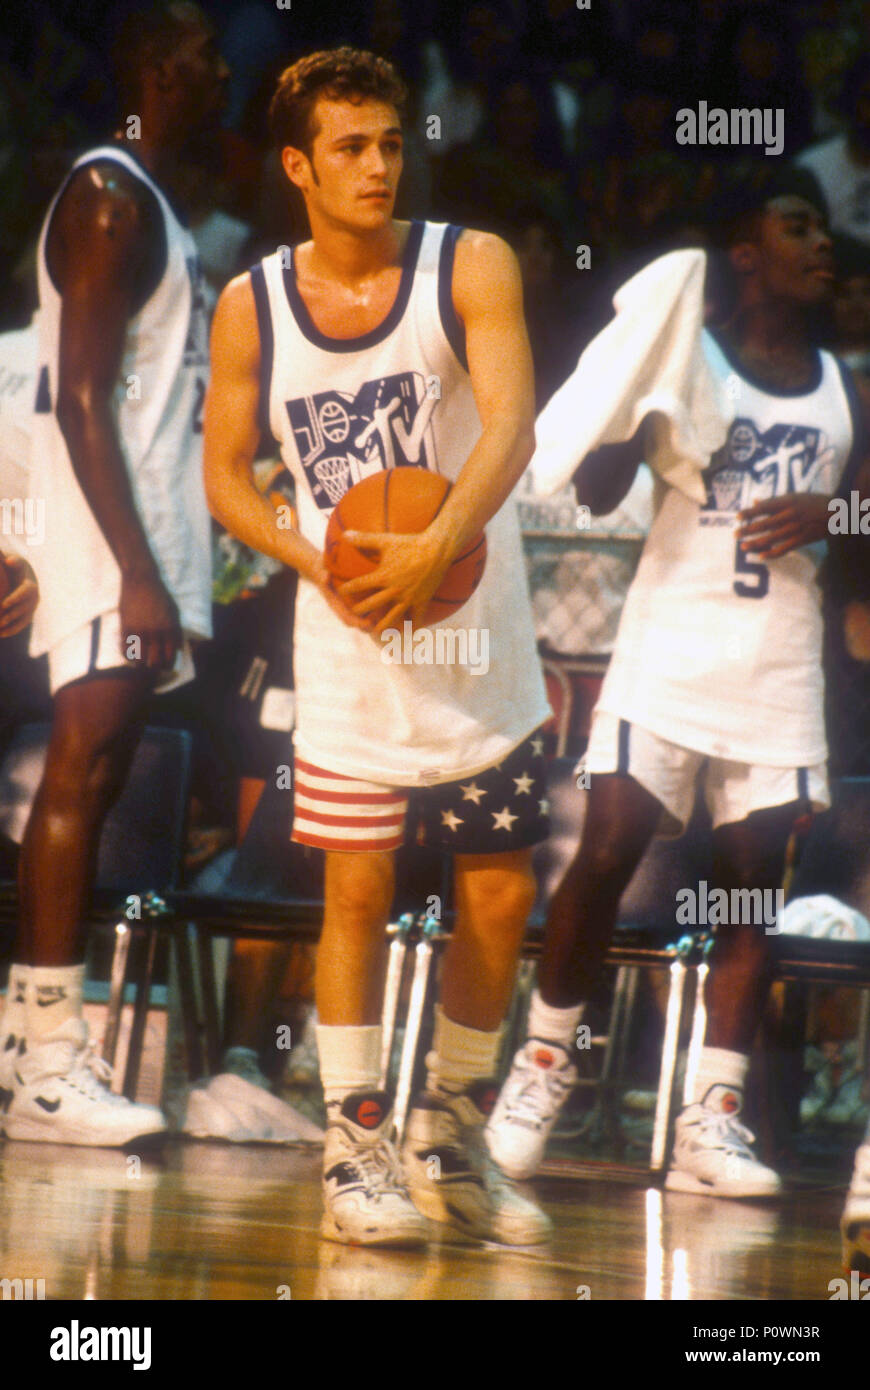 LOS ANGELES, CA - SEPTEMBER 15: Actor Luke Perry attends MTV's First Annual Rock 'N Jock Basketball Game on September 15, 1991 at Loyola Marymount University in Los Angeles, California. Photo by Barry King/Alamy Stock Photo Stock Photo